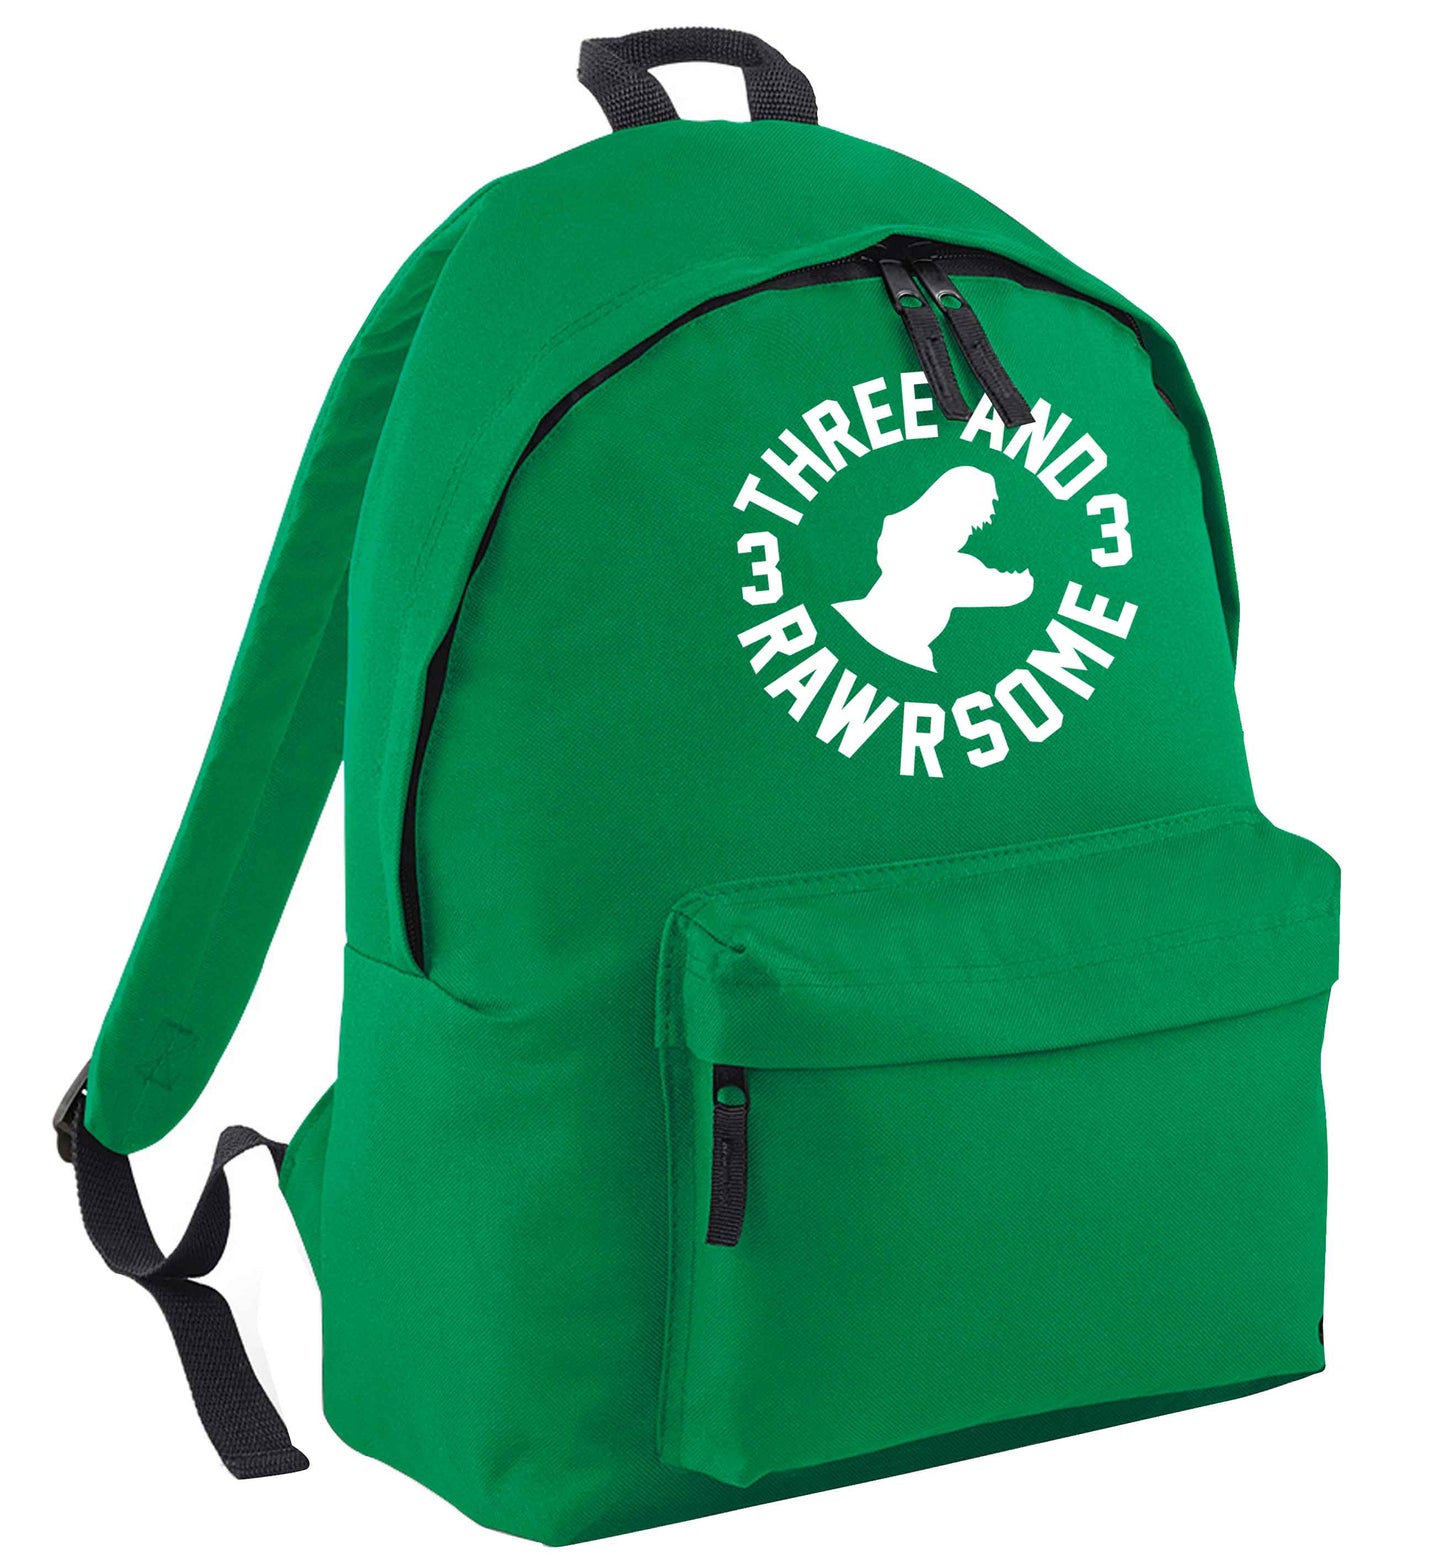 Three and rawrsome green adults backpack